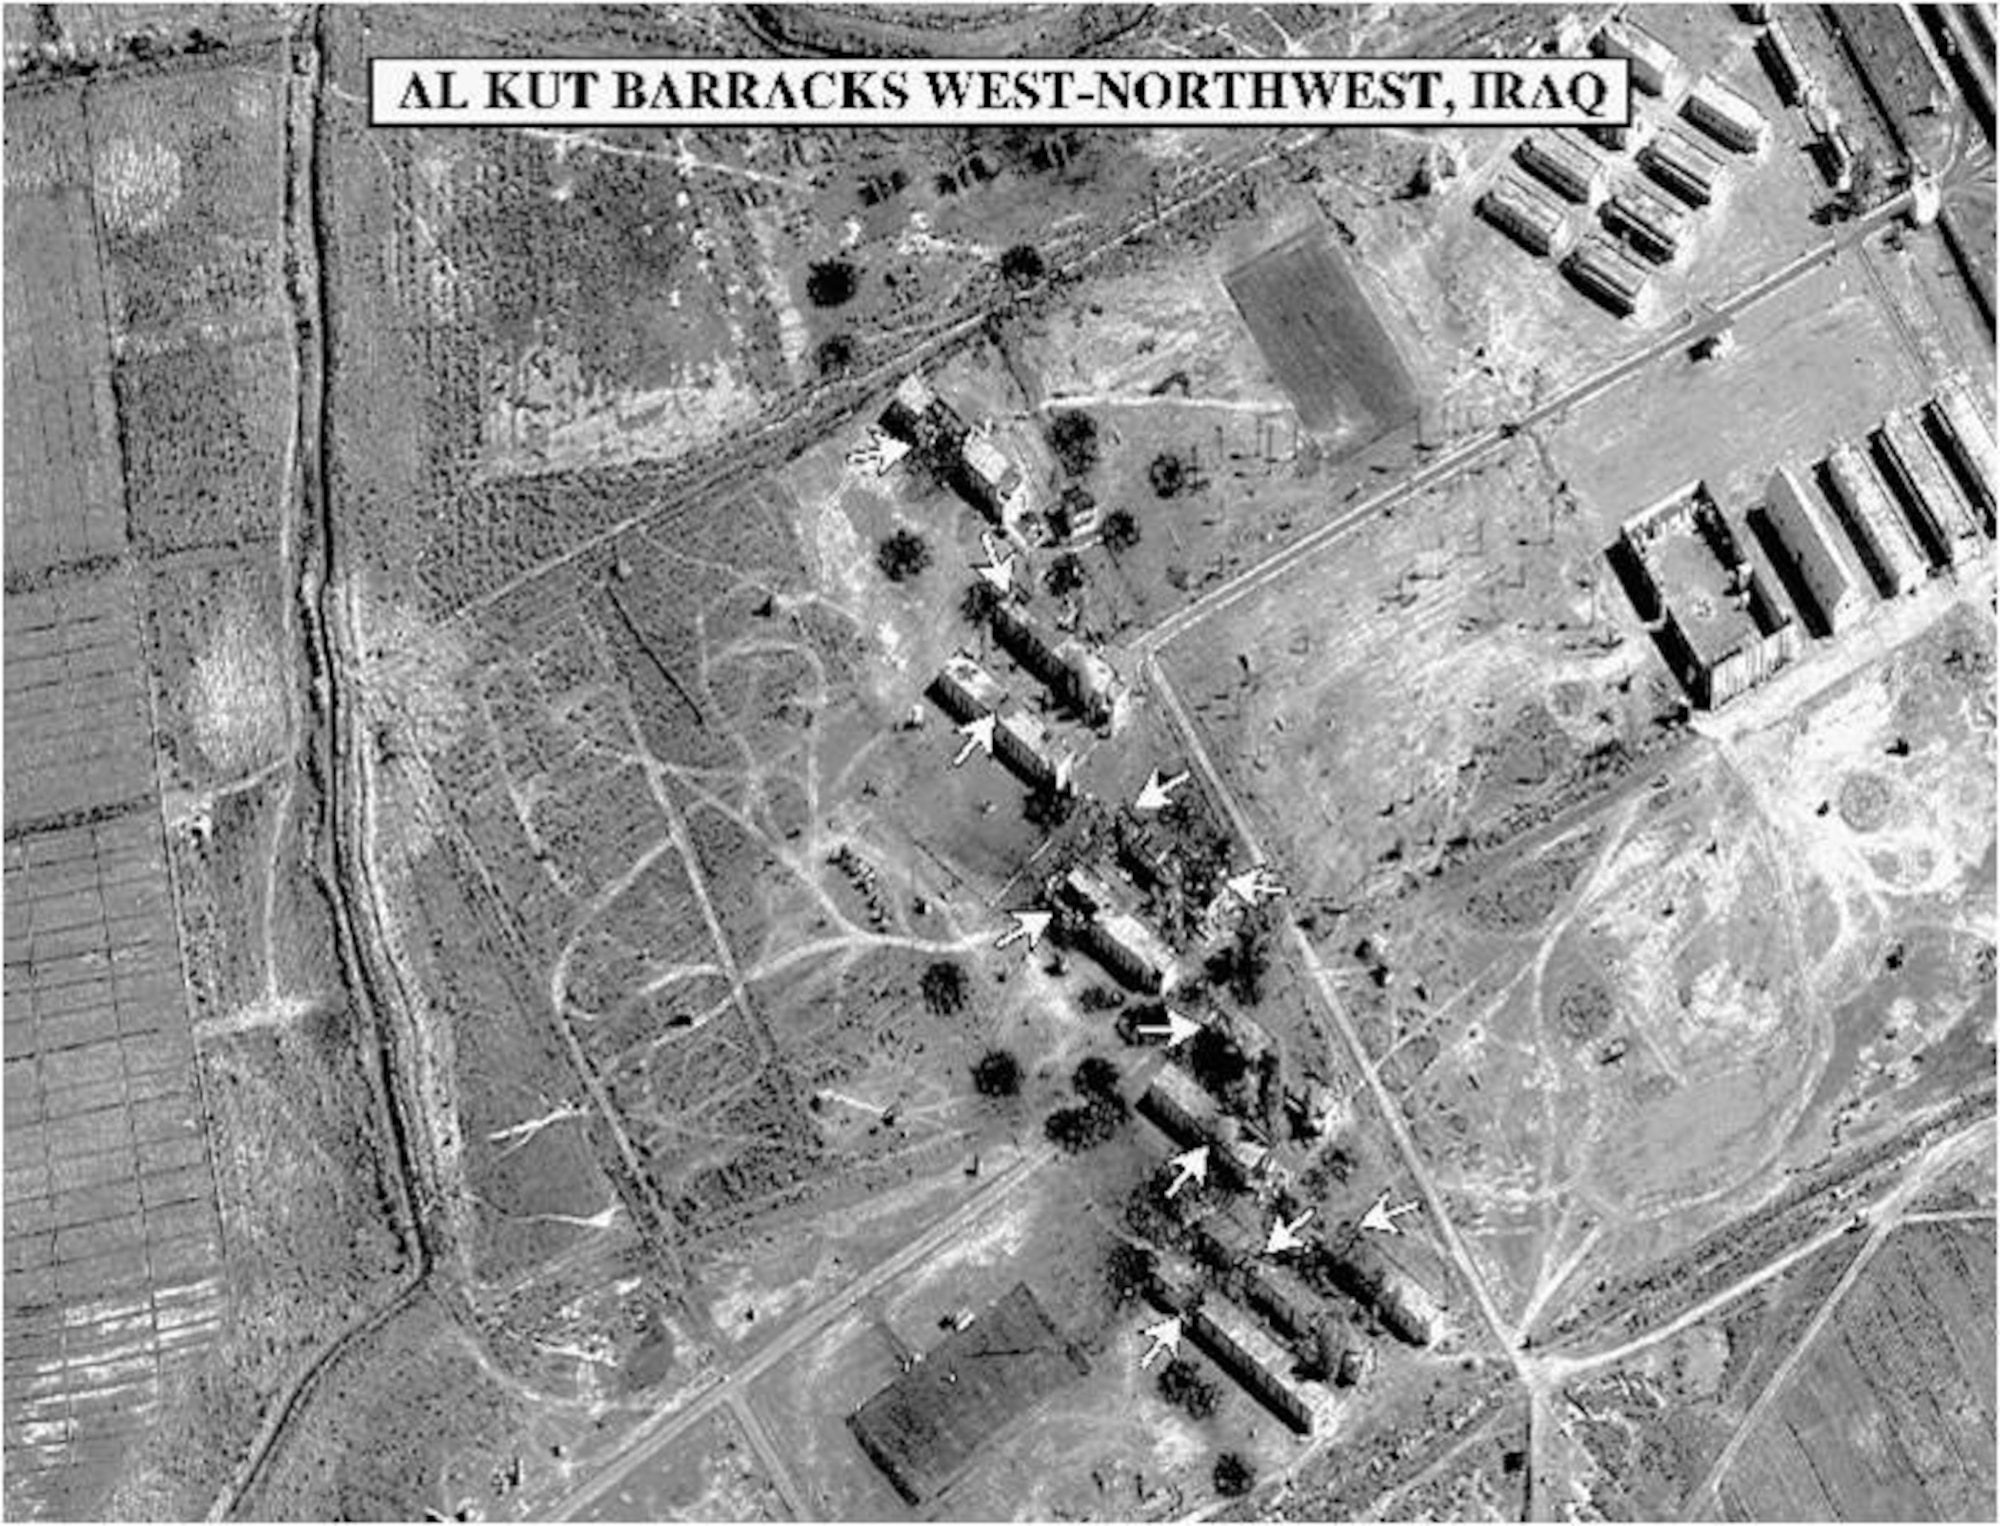 Battle damage assessment of the Al Kut Republican Guard barracks in western Iraq after the first B-1 bomber dropped munitions on it during Operation Desert Fox, December 1998.